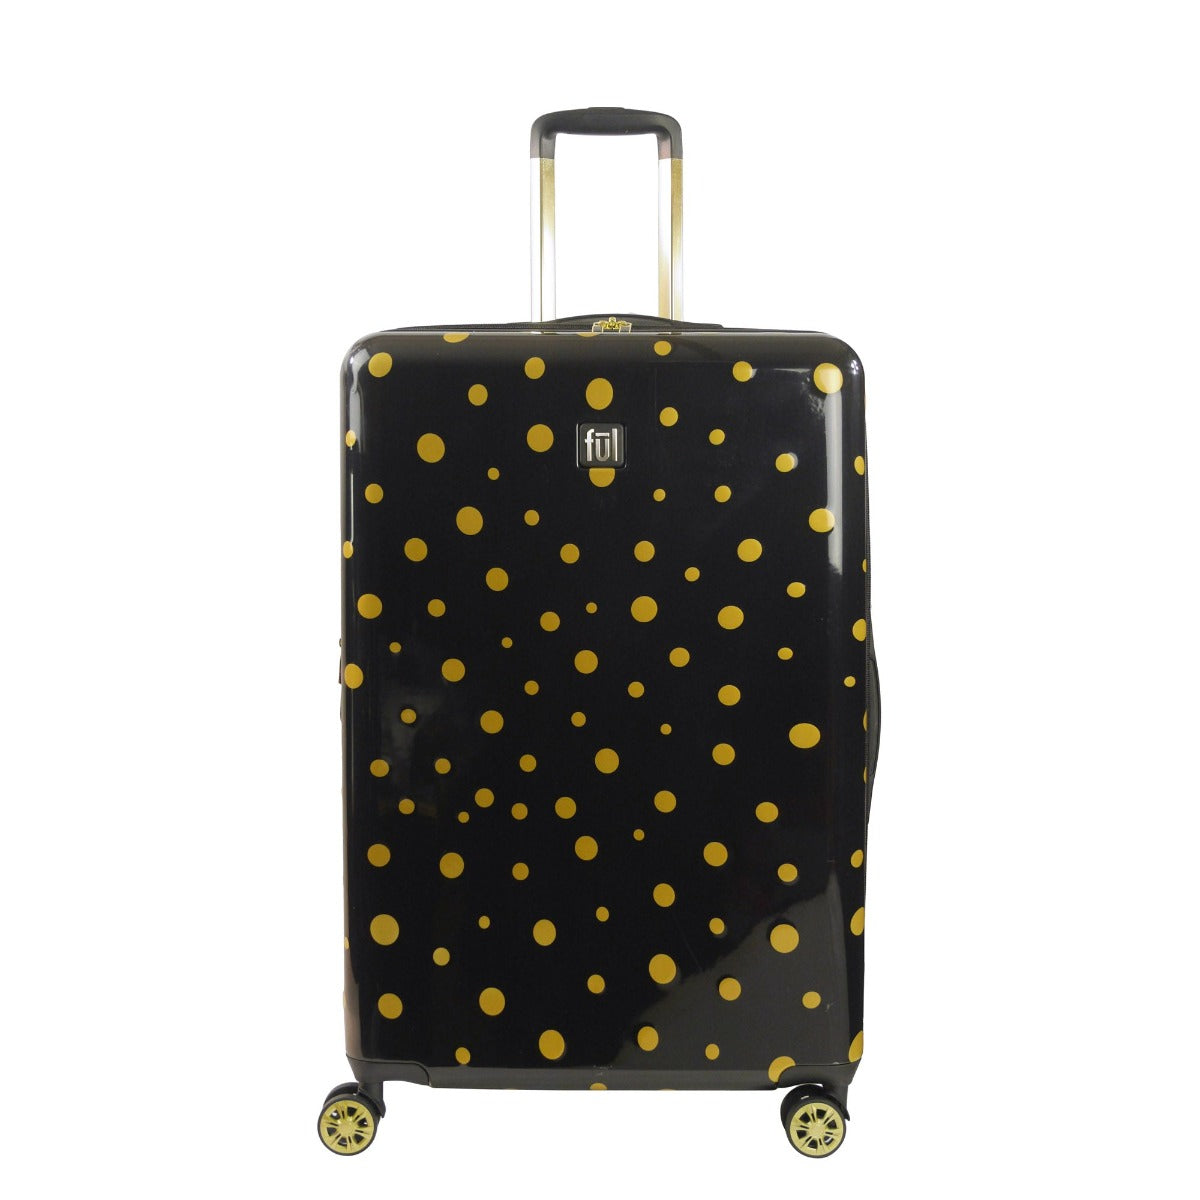 Ful Impulse Mixed Dots hardside spinner 31" checked luggage black gold suitcase